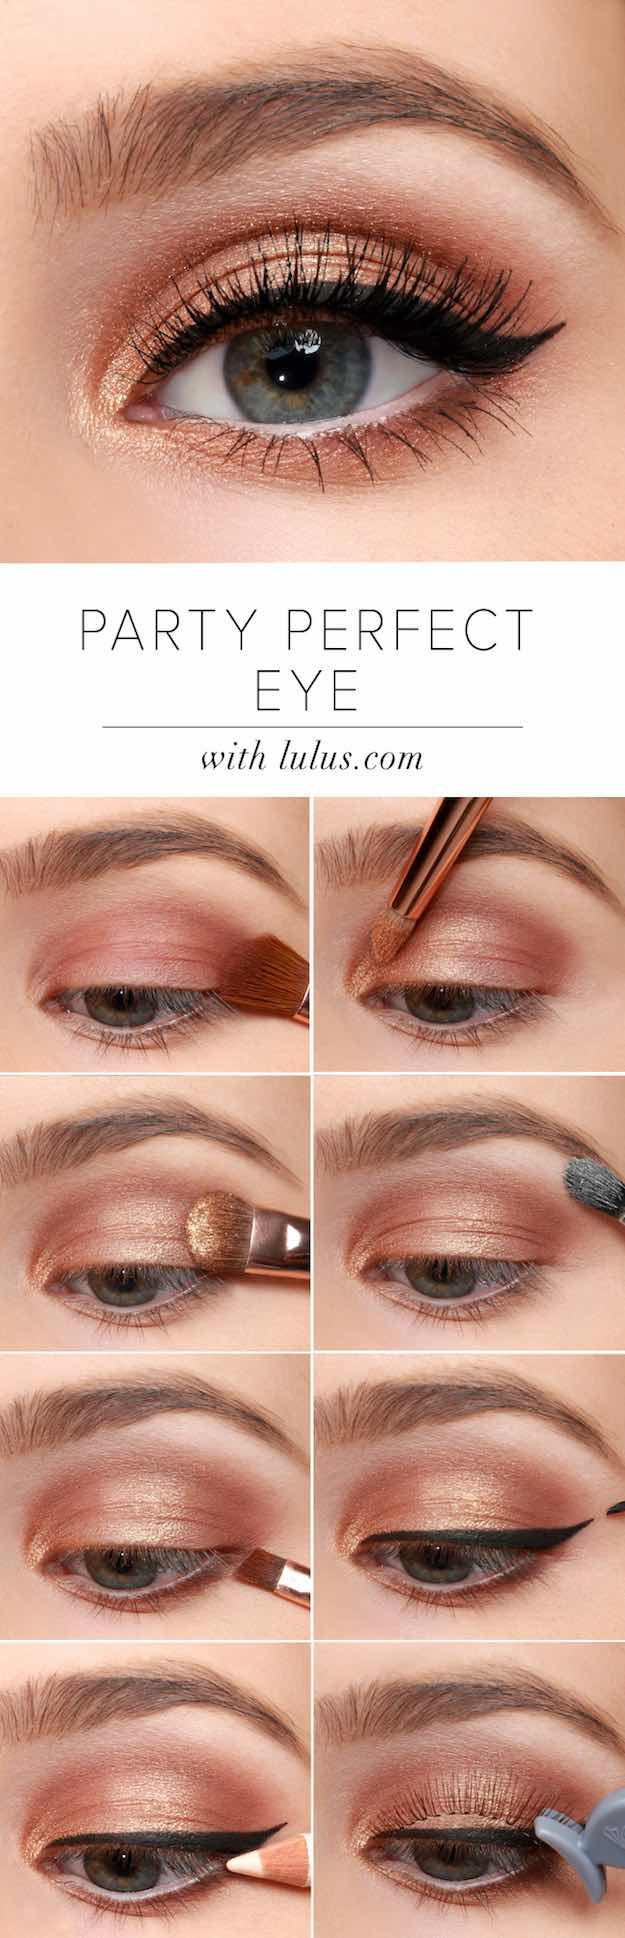 Eye Makeup Tutorials Pretty Peach Makeup Tutorials To Create With Your Peach Palettes